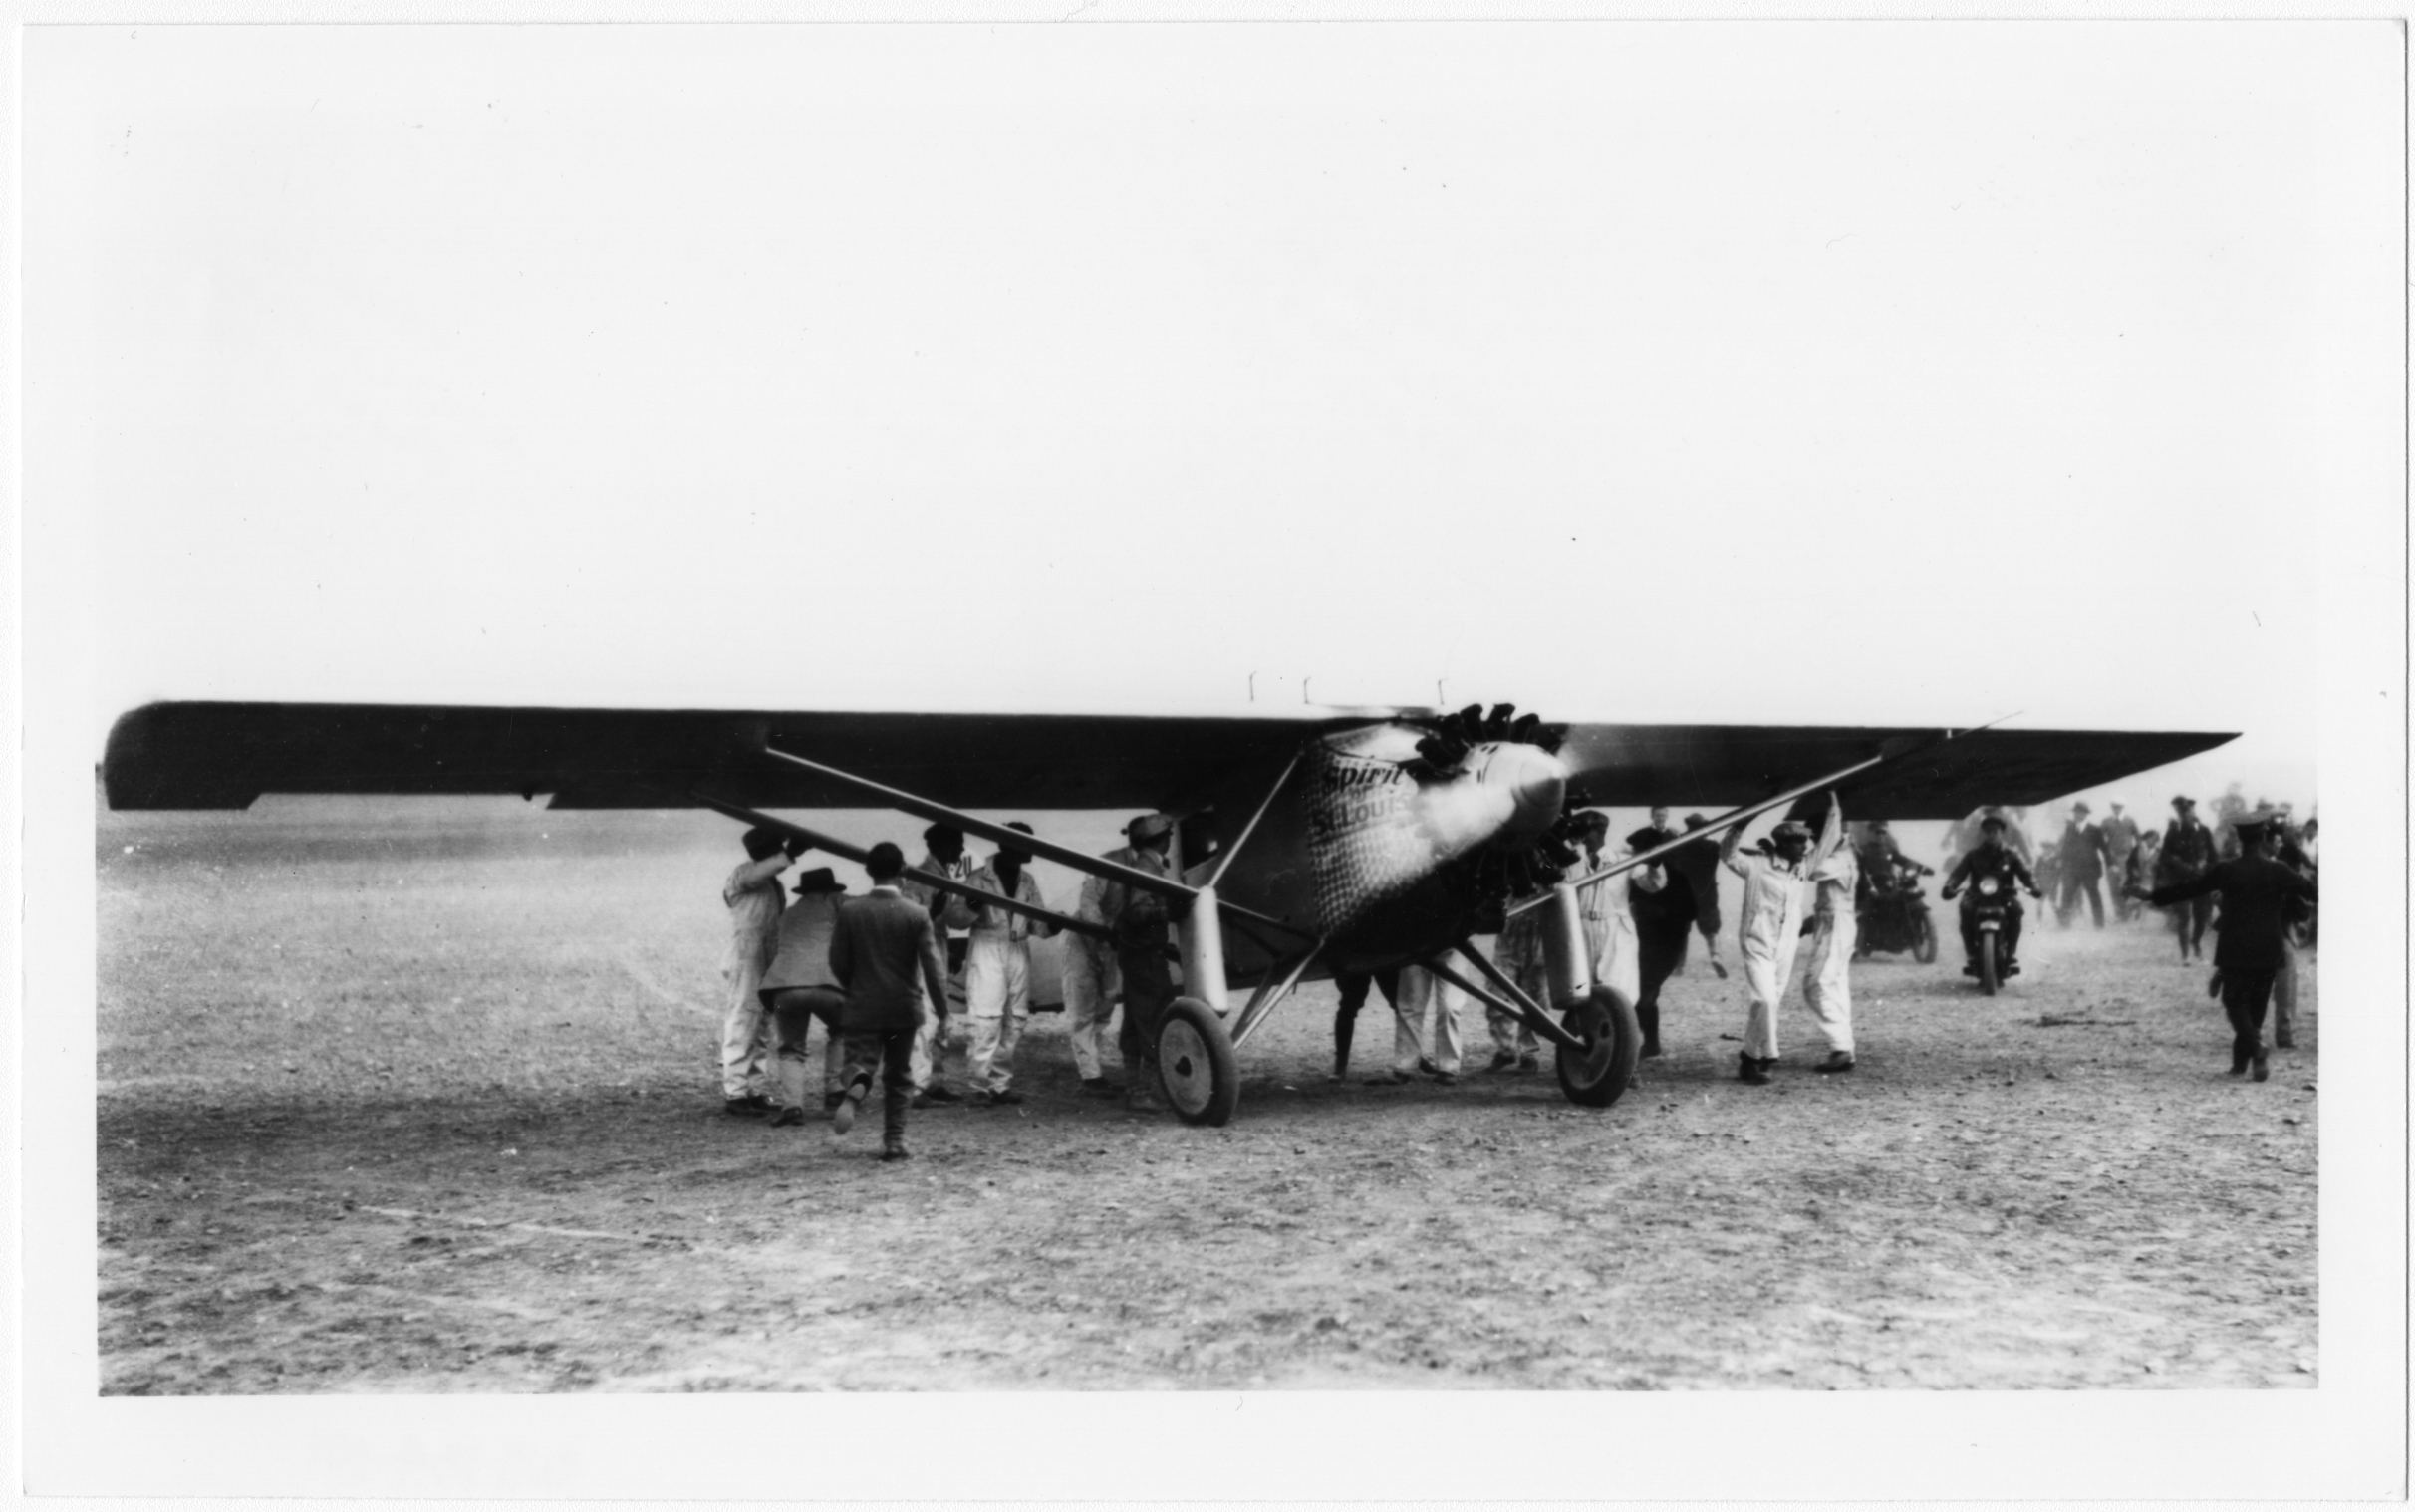 Black and white photographic copy print of Charles Lindbergh arriving in the Spirit of St. Louis on Mills Field Municipal Airport, San Francisco, September 16, 1927. Image depicts airplane from front at oblique angle with crews in white coveralls under airplane wings. propeller is in motion, with men in suits approaching airplane. Police officers on motorcycles and crowd of people in background.